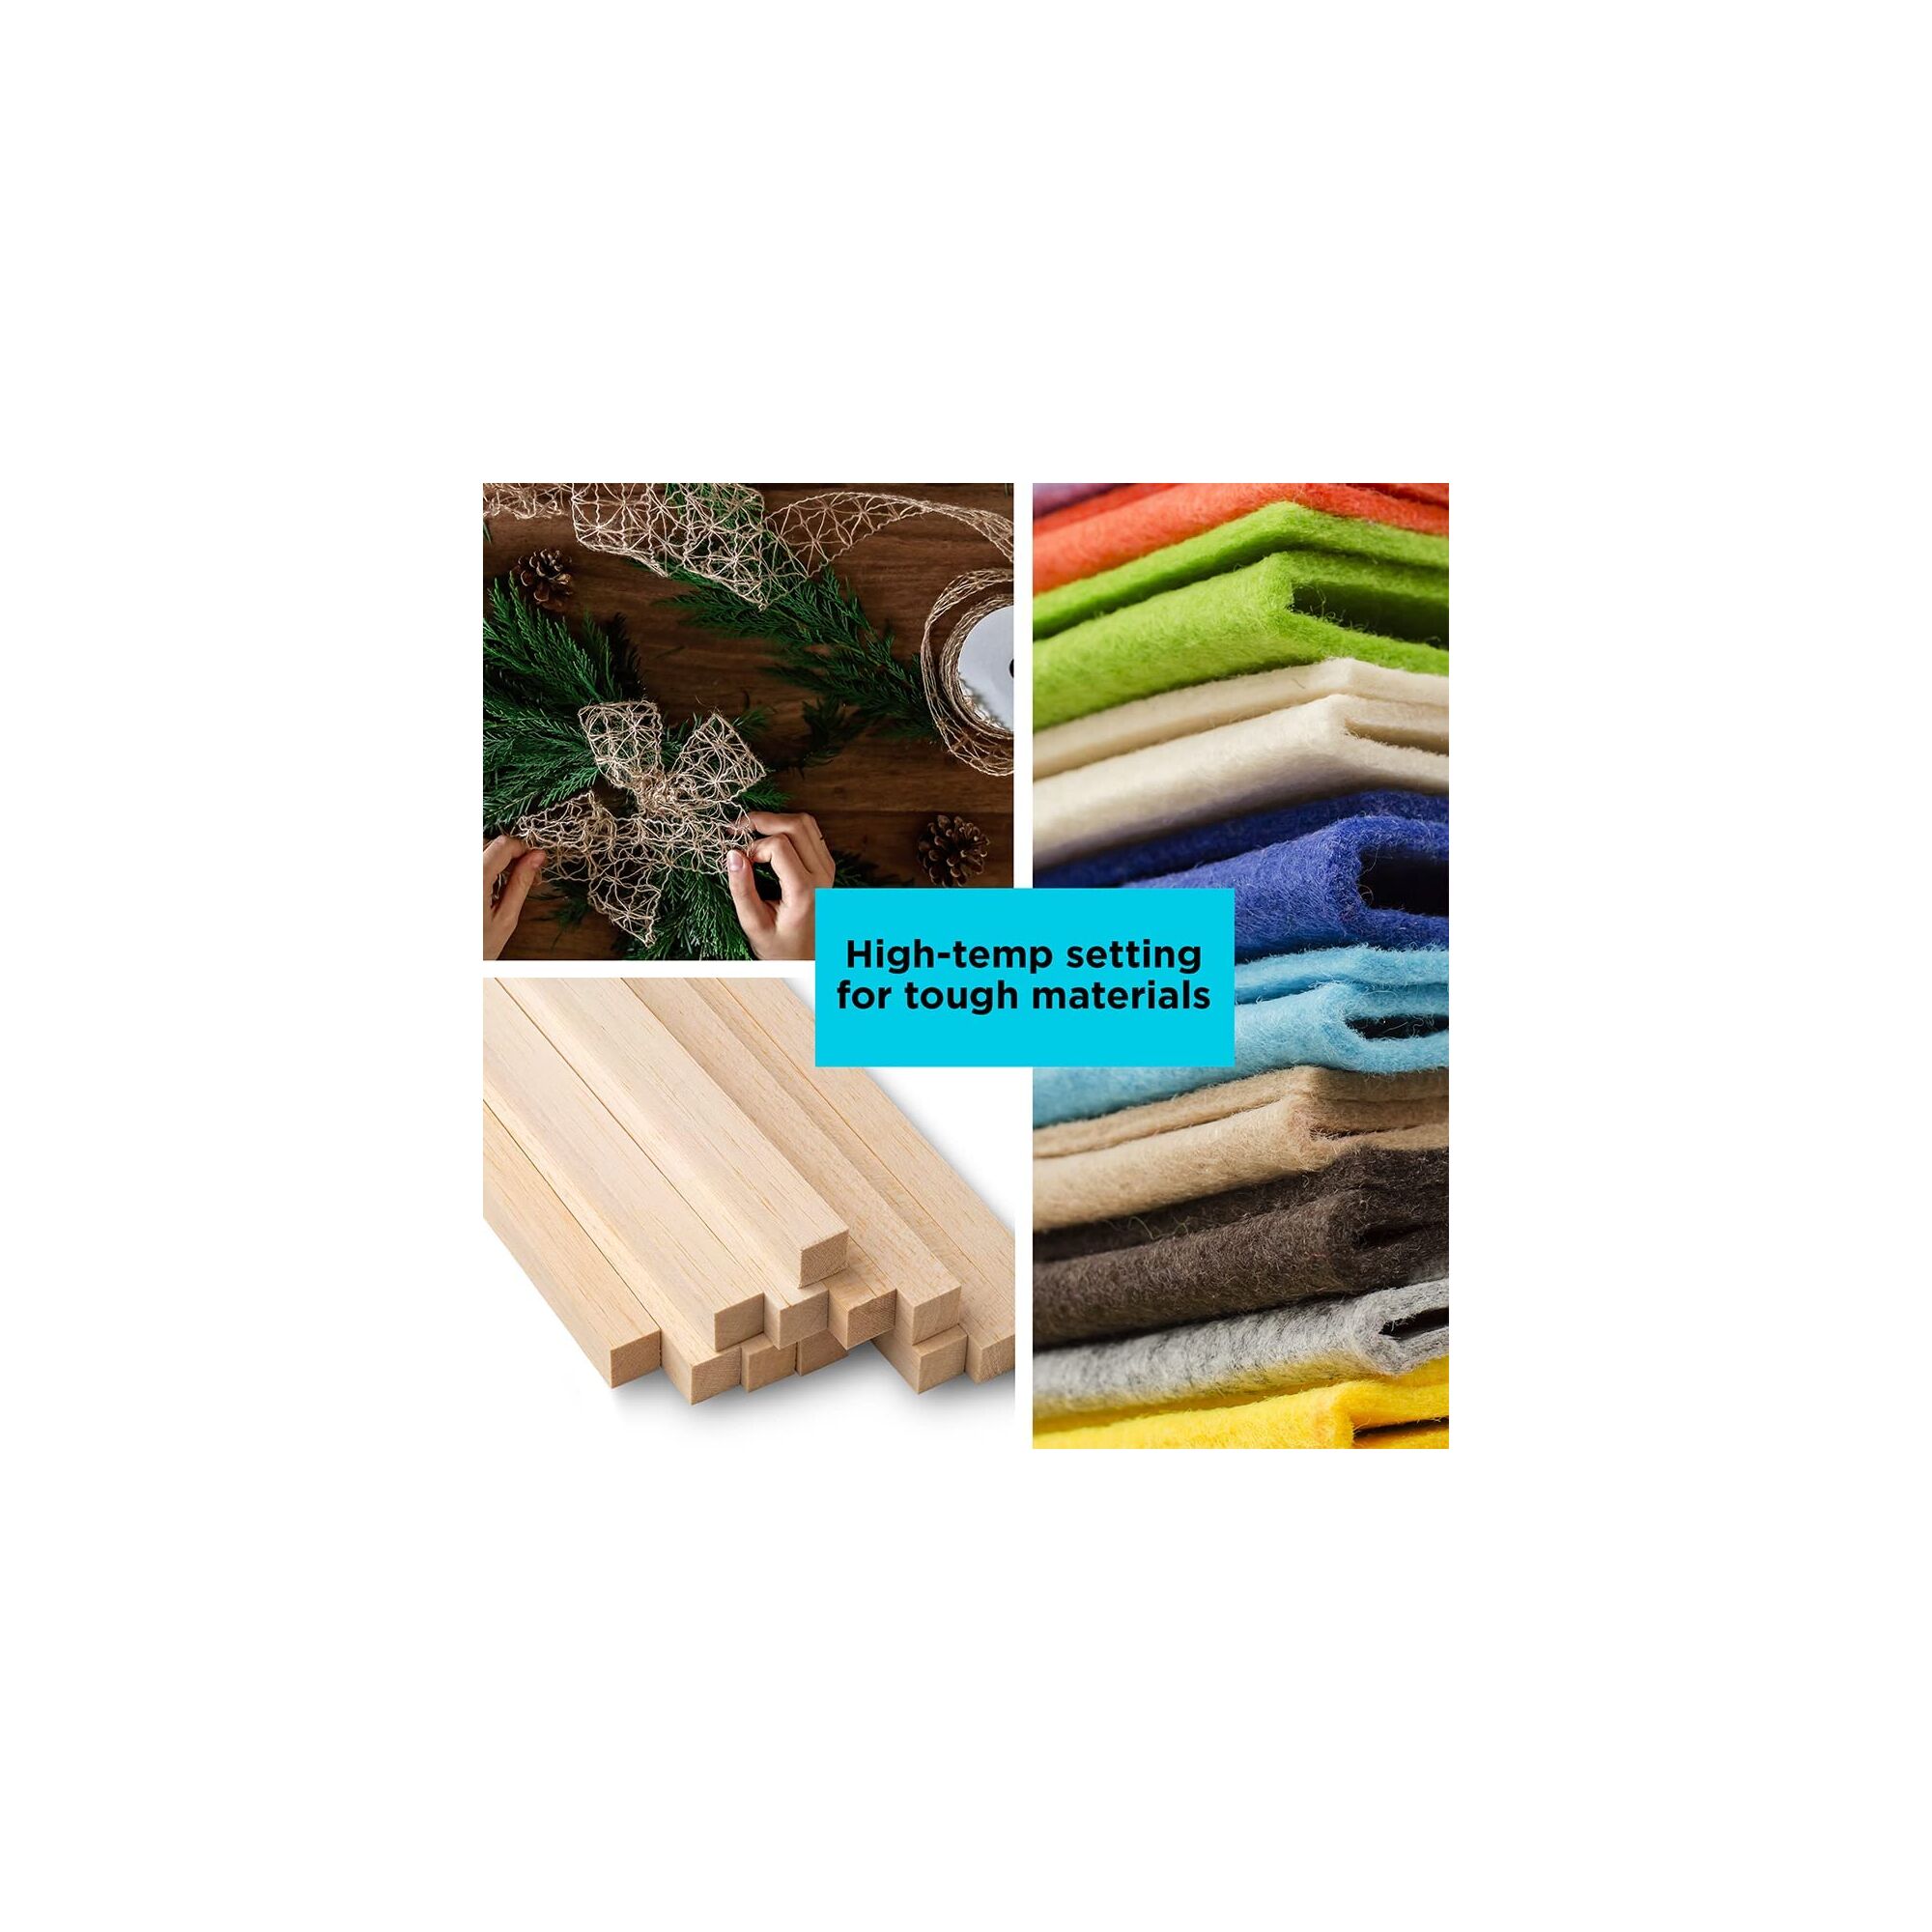 Various materials that can be used with Black and Decker corded glue gun, including cloth or wood